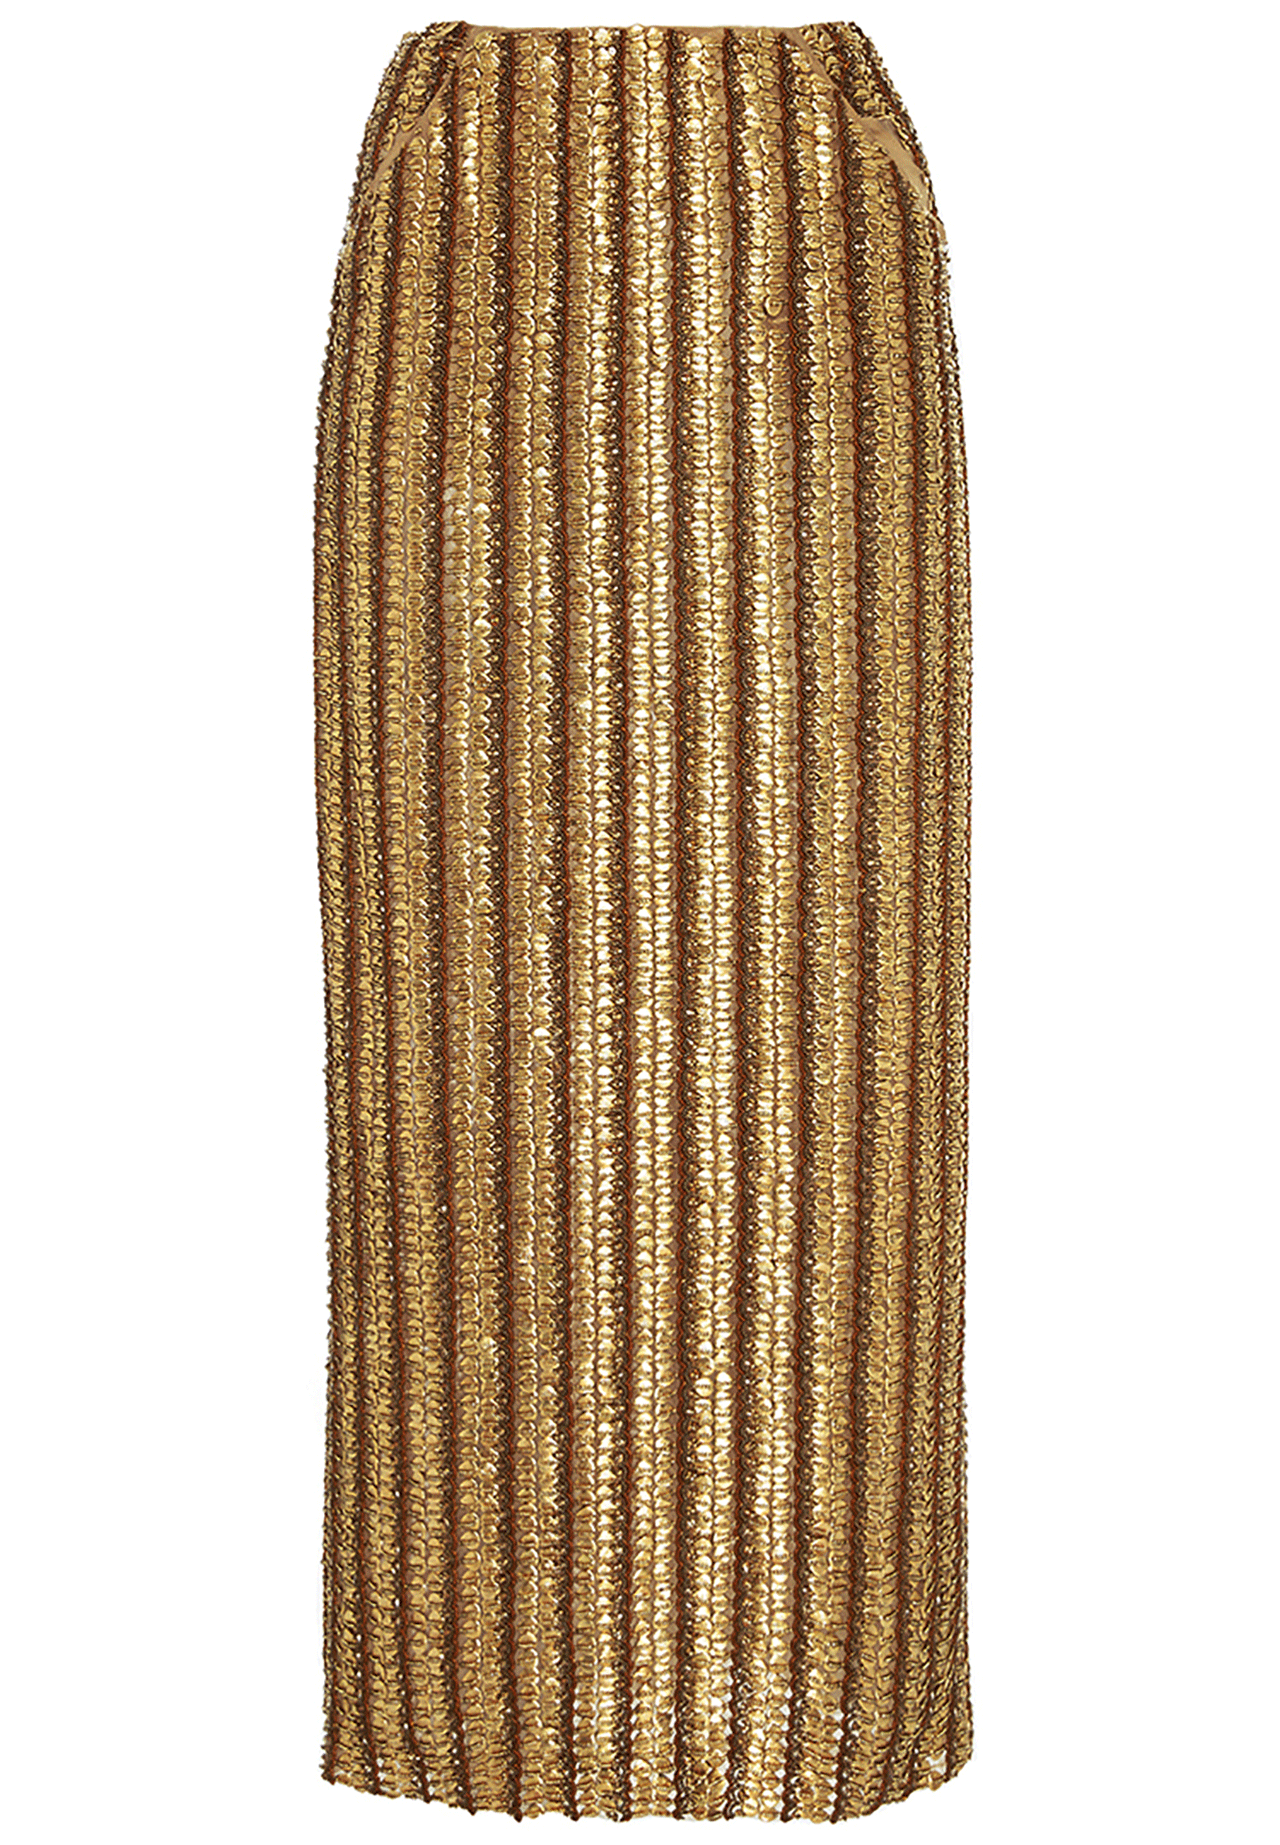 5 metallic mesh buys for anyone who loved Kendall's 21st party dress ...